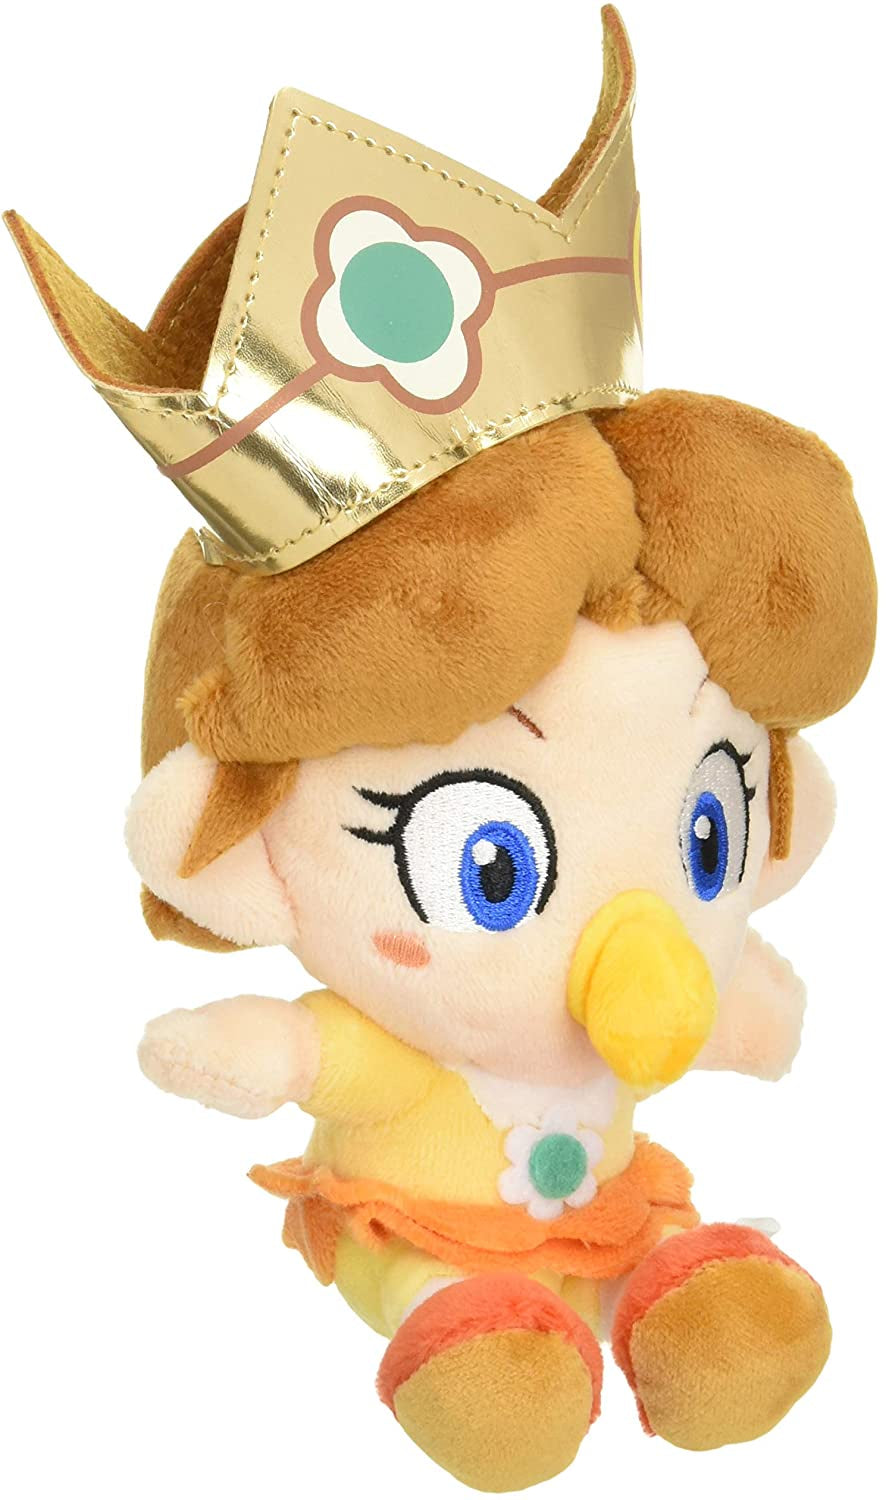 Super Mario All Star Collection Baby Daisy (S) Plush Doll Toy